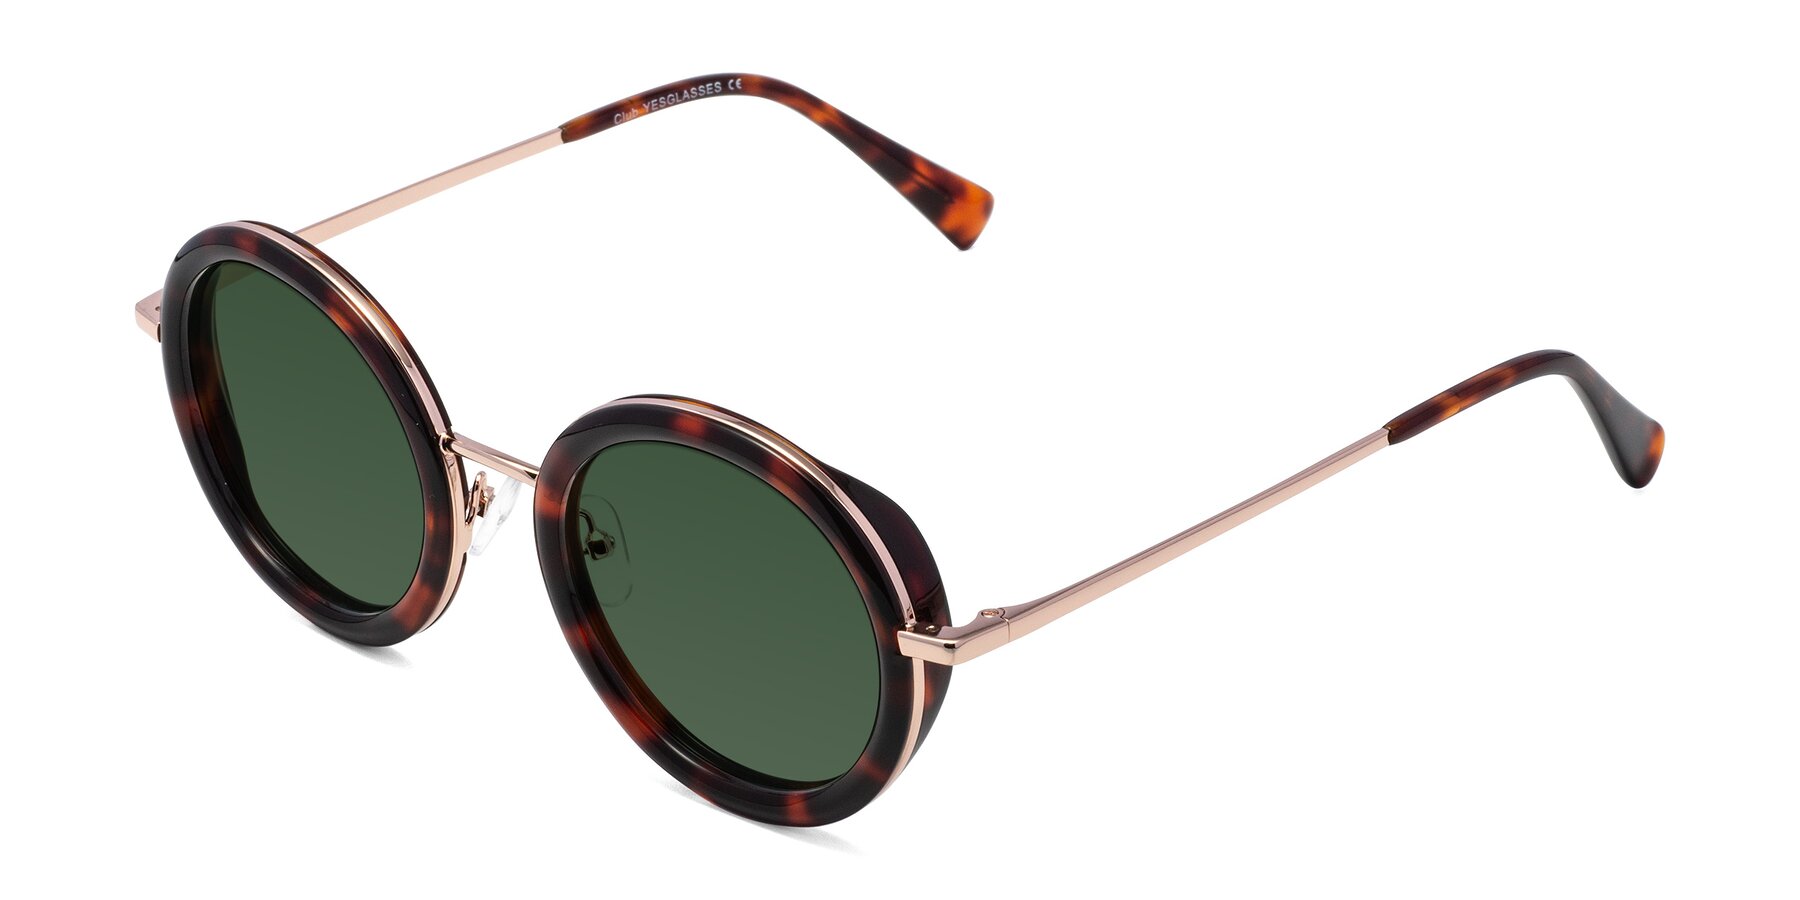 Angle of Club in Tortoise-Rose Gold with Green Tinted Lenses